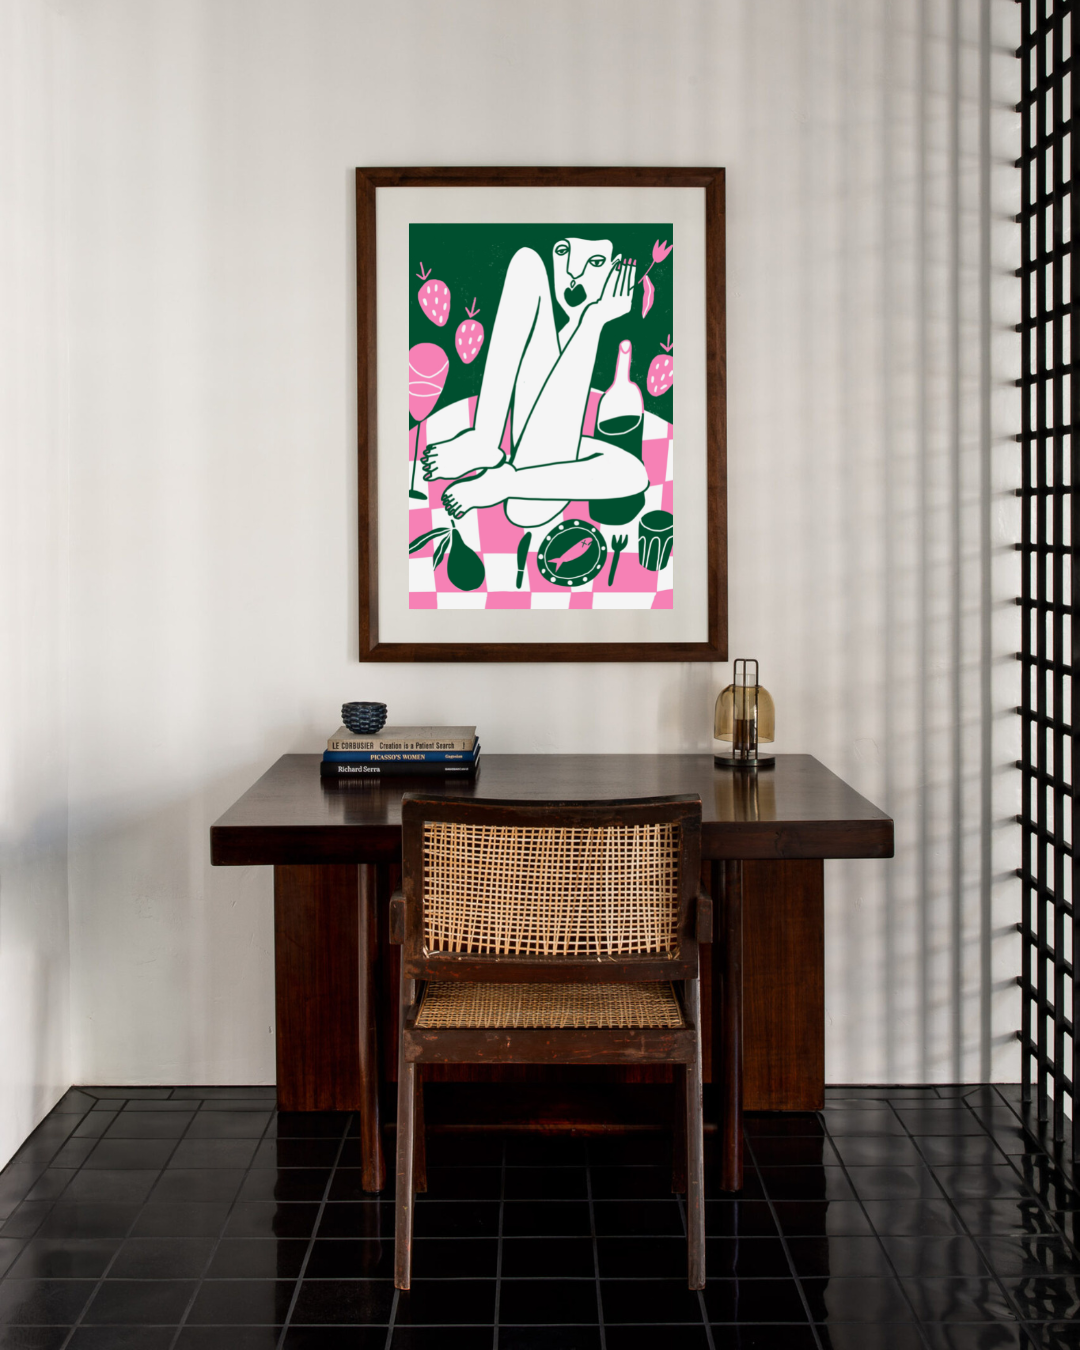 Green and pink abstract artwork pictured above a desk